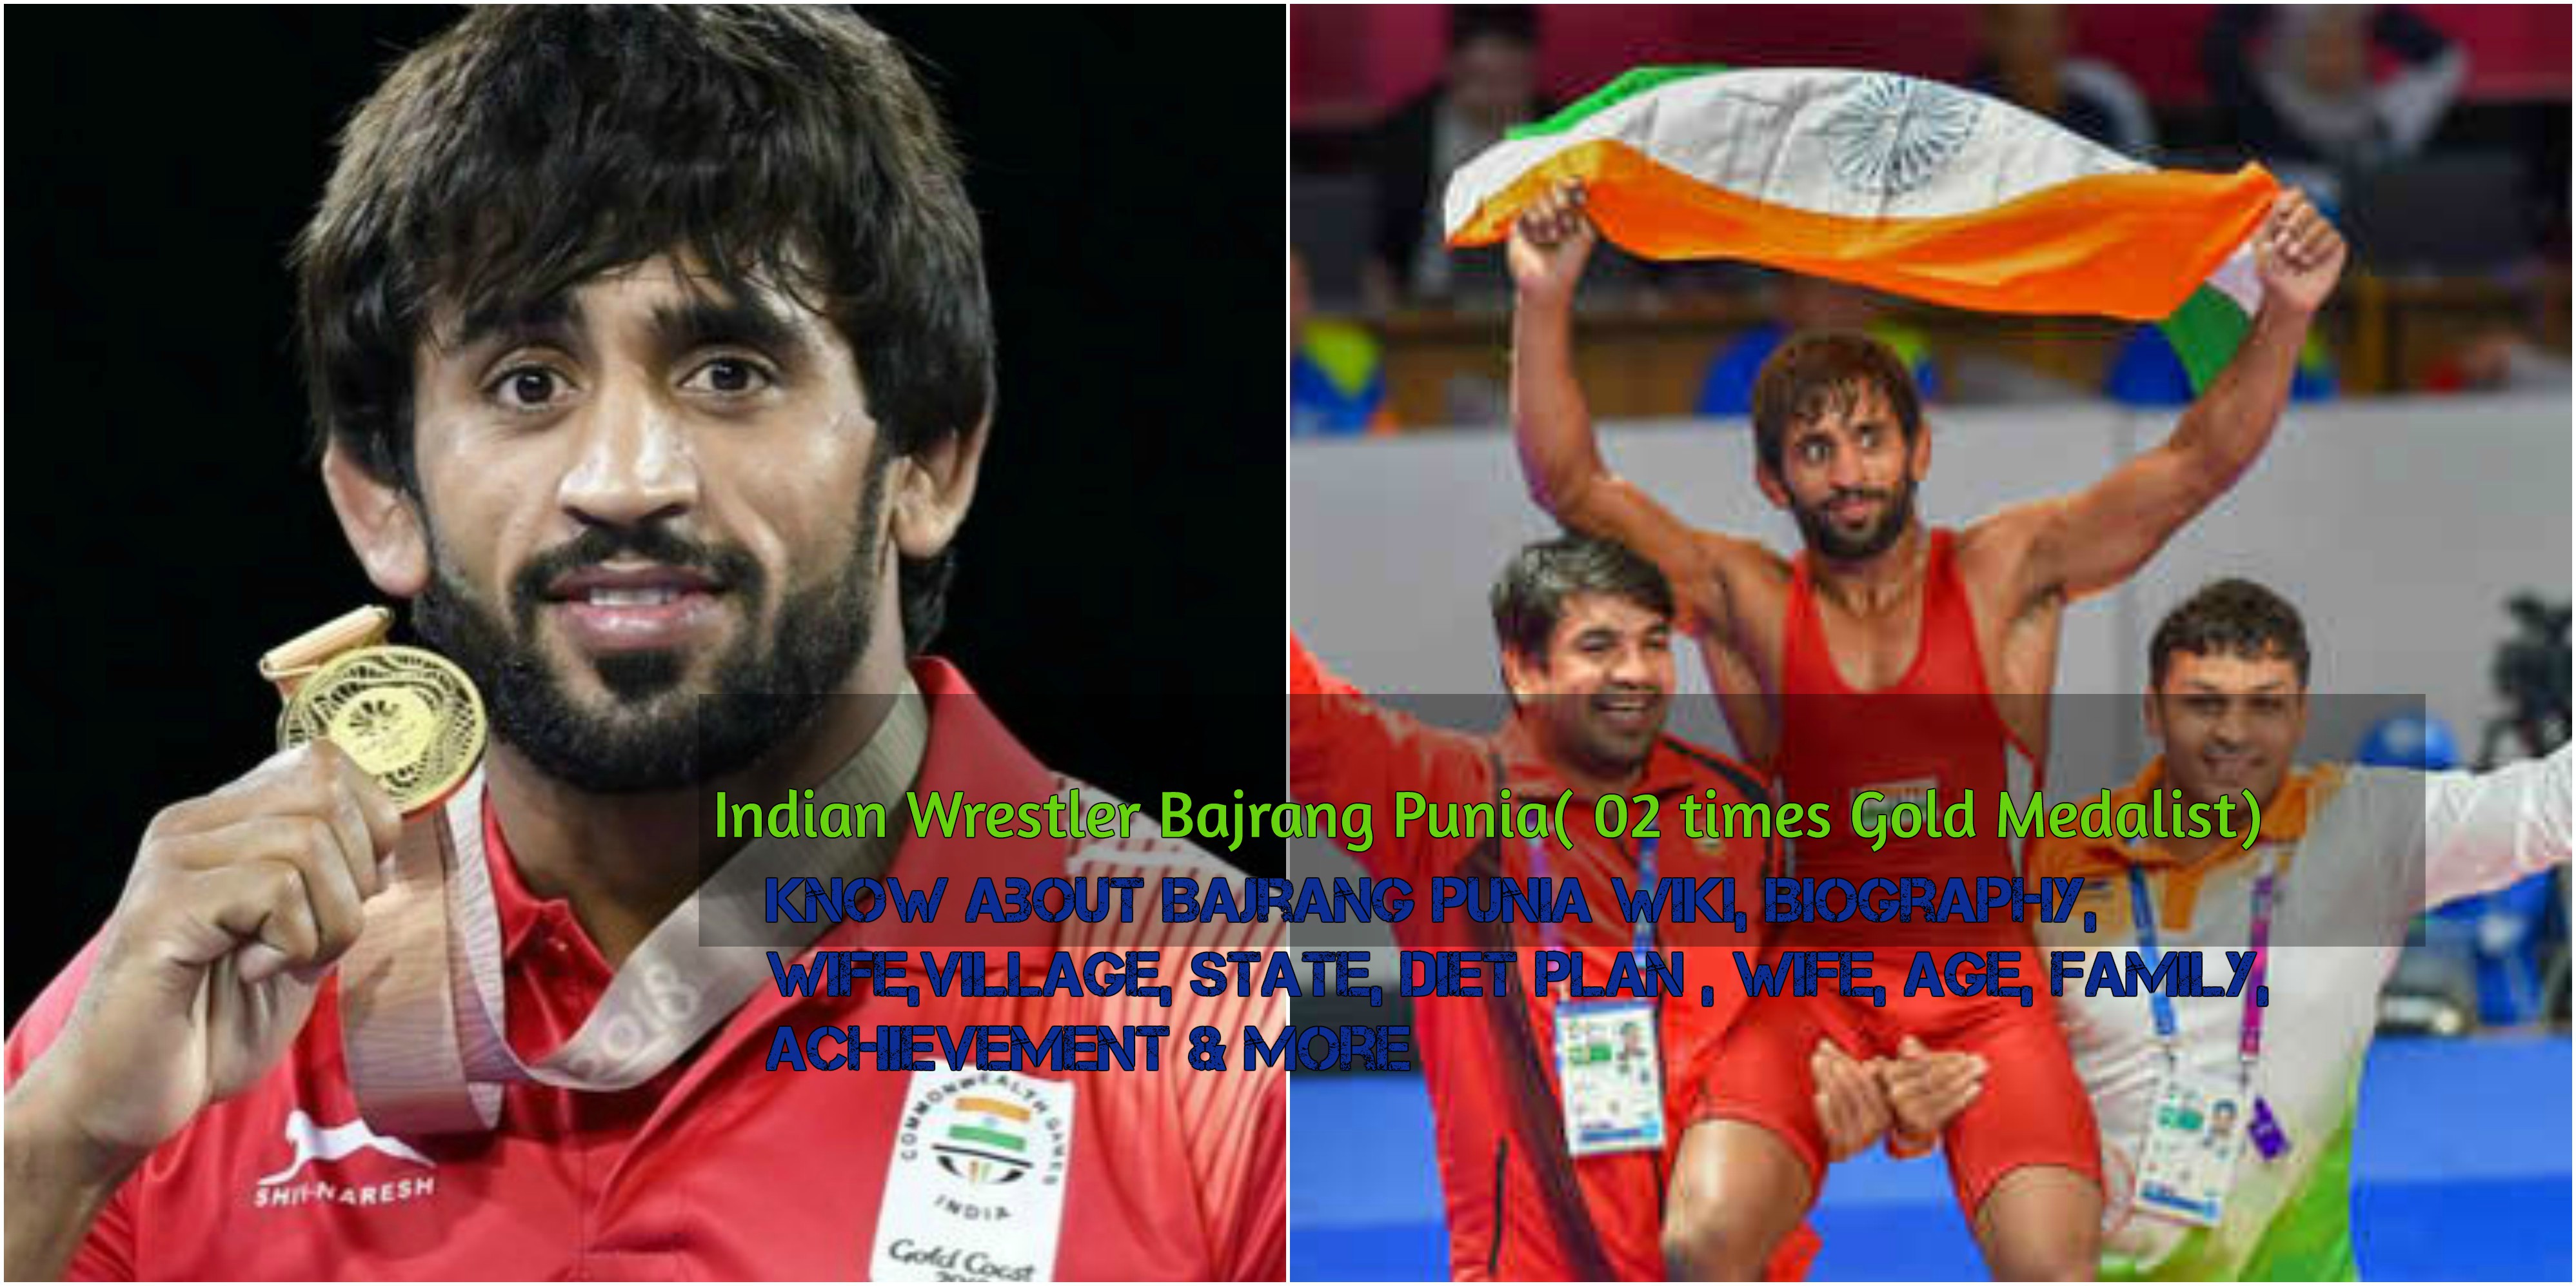 Bajrang Punia Wiki, Biography, Wife,Village, State, Diet Plan , Wife, Age, Family, Achievement & More